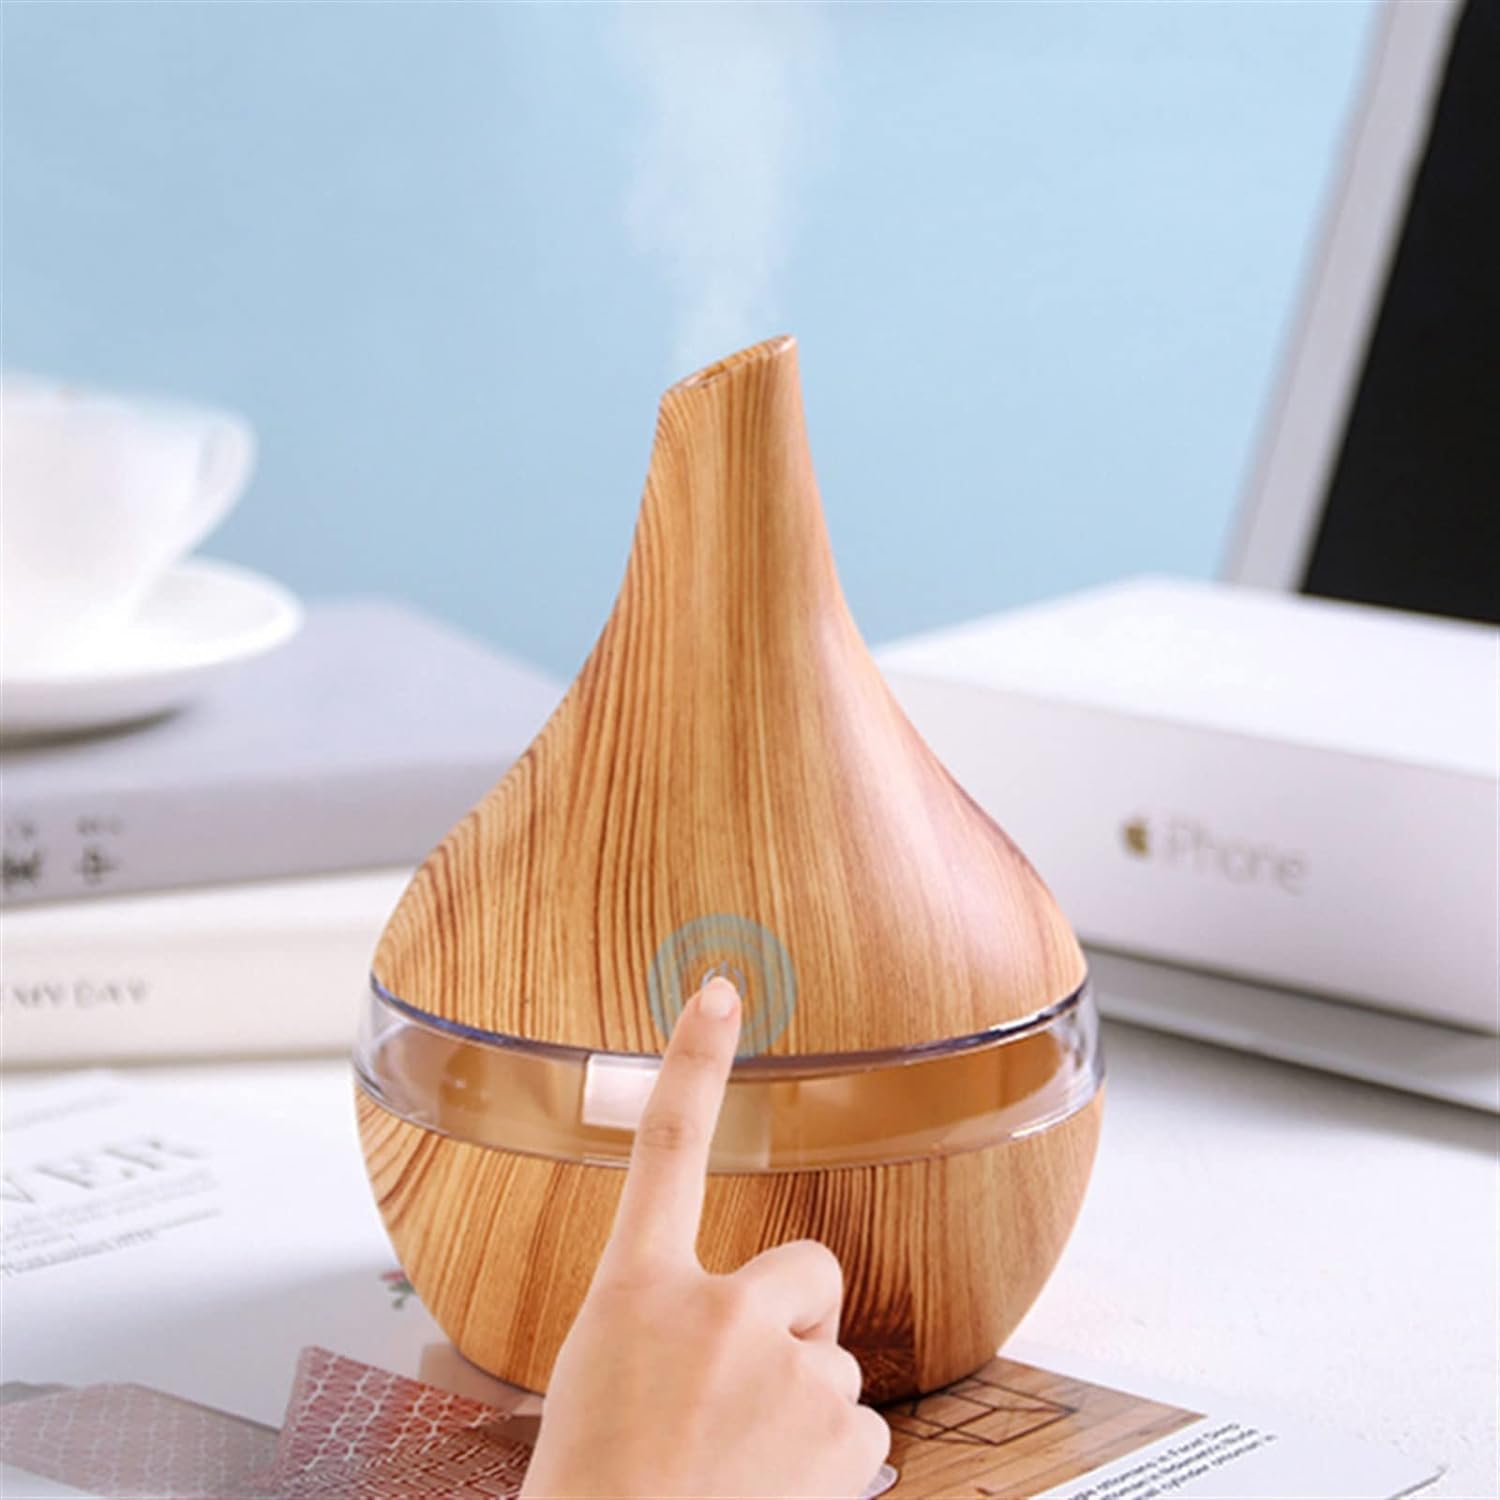 ANTCRZ Humidifier 300ML Air Humidifier USB Electric Aroma Diffuser Mist Wood Grain Oil Aromatherapy Mini 7 Color LED Light for Car Home Office (Color : Light Wood Grain)